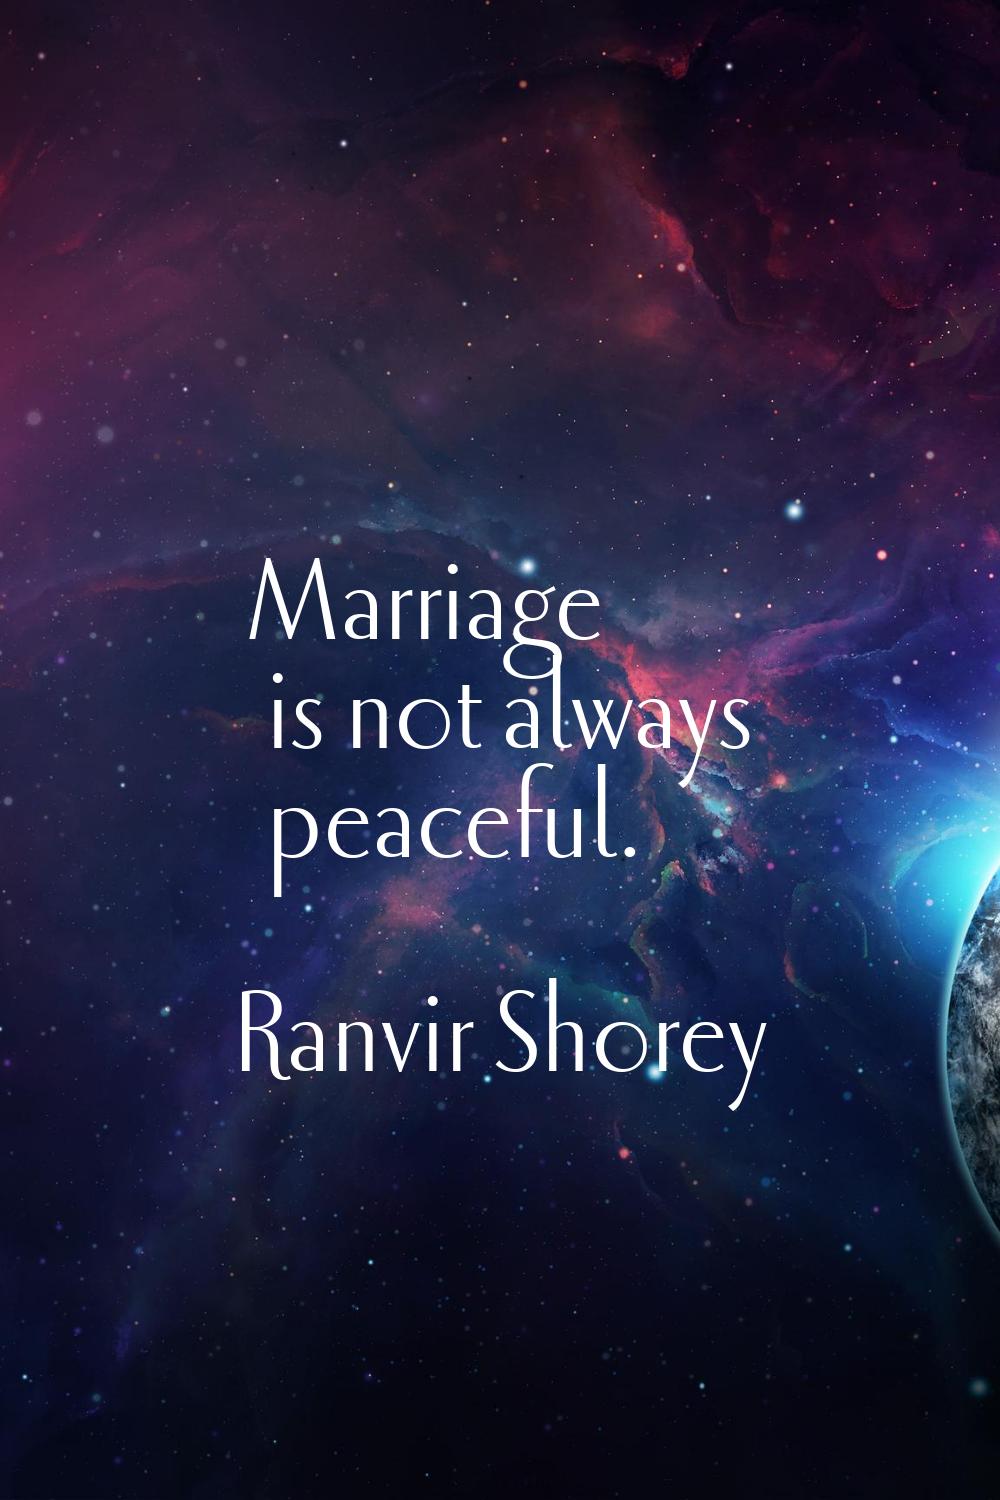 Marriage is not always peaceful.